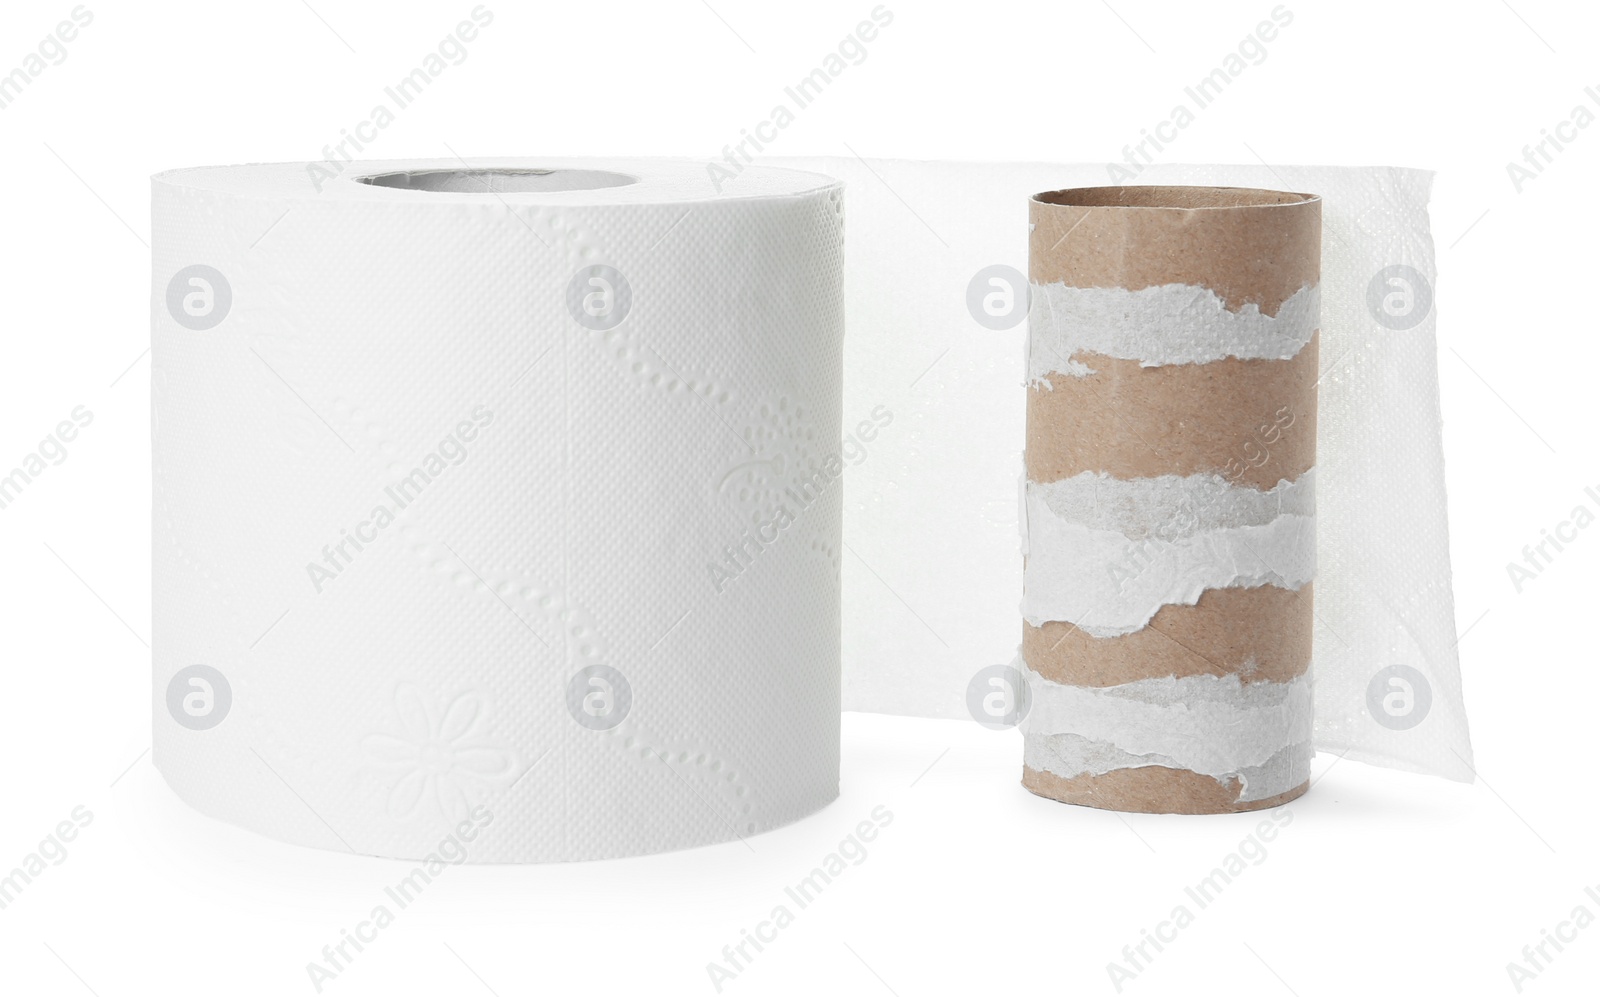 Photo of Full and empty toilet paper rolls on white background